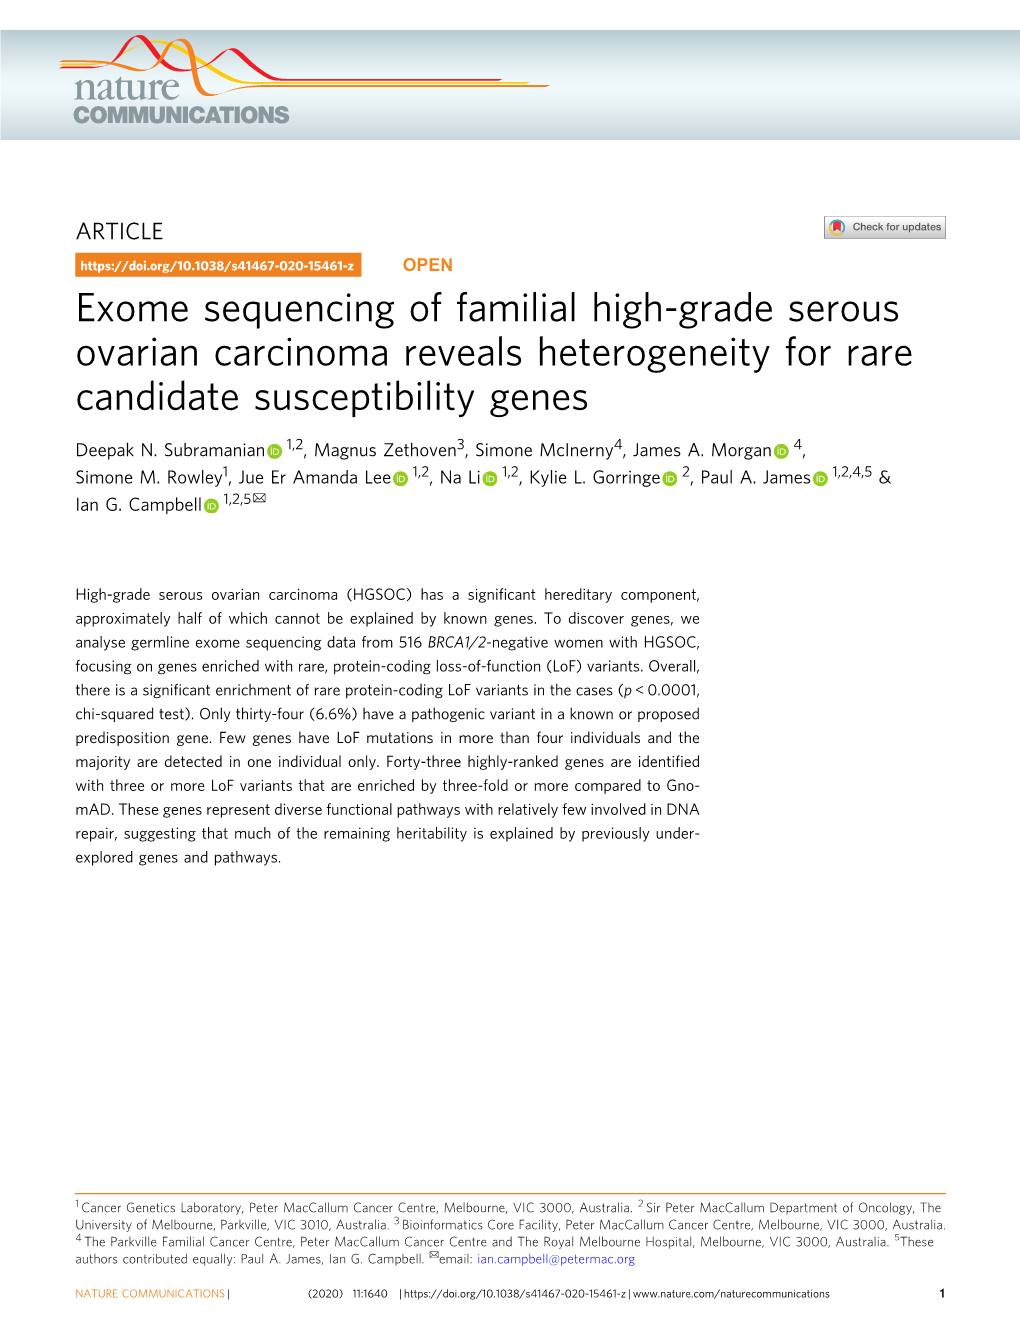 Exome Sequencing of Familial High-Grade Serous Ovarian Carcinoma Reveals Heterogeneity for Rare Candidate Susceptibility Genes